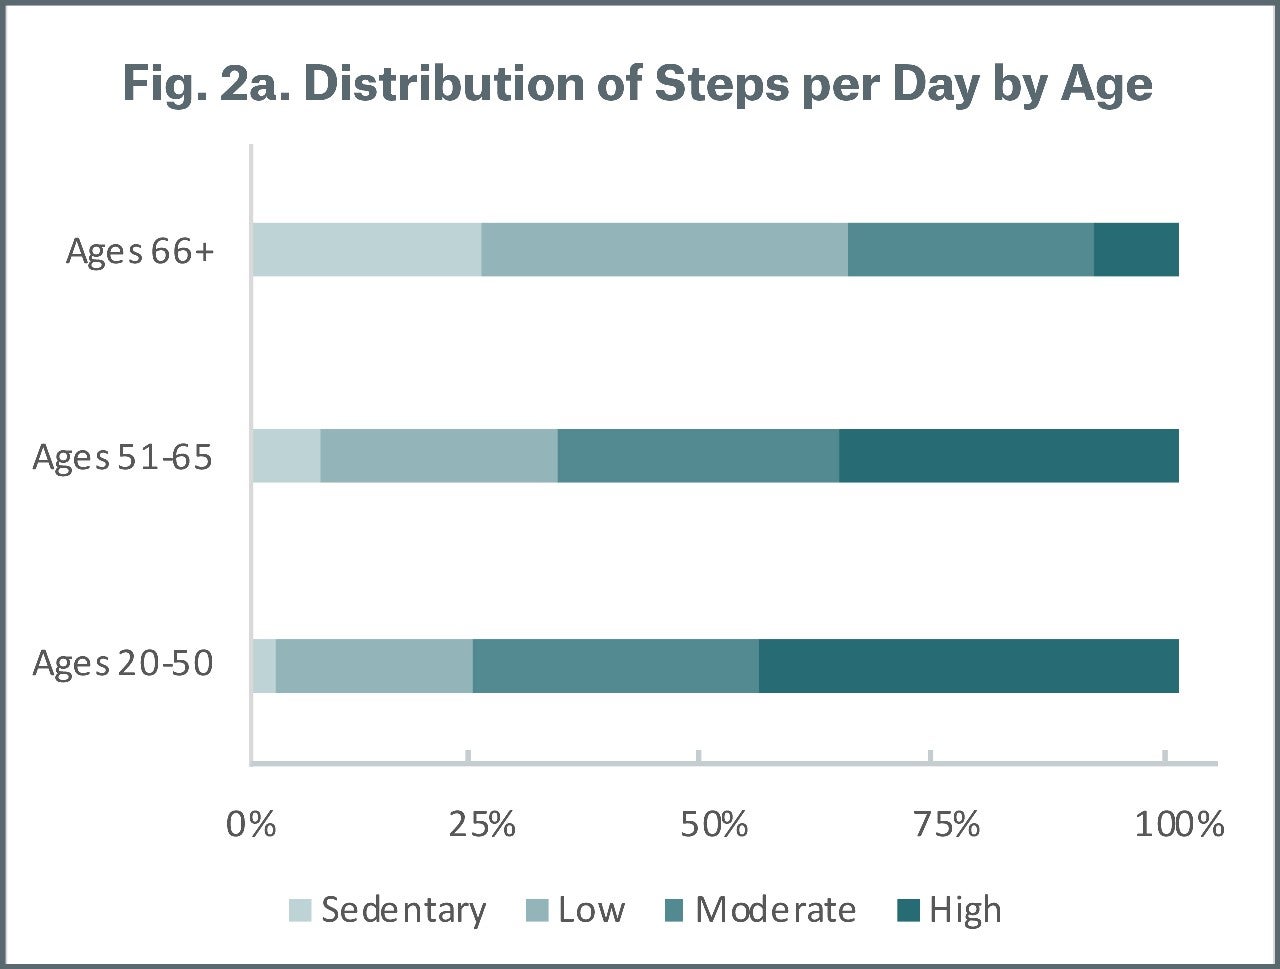 Figure 2a Distribution of Steps per Day by Age